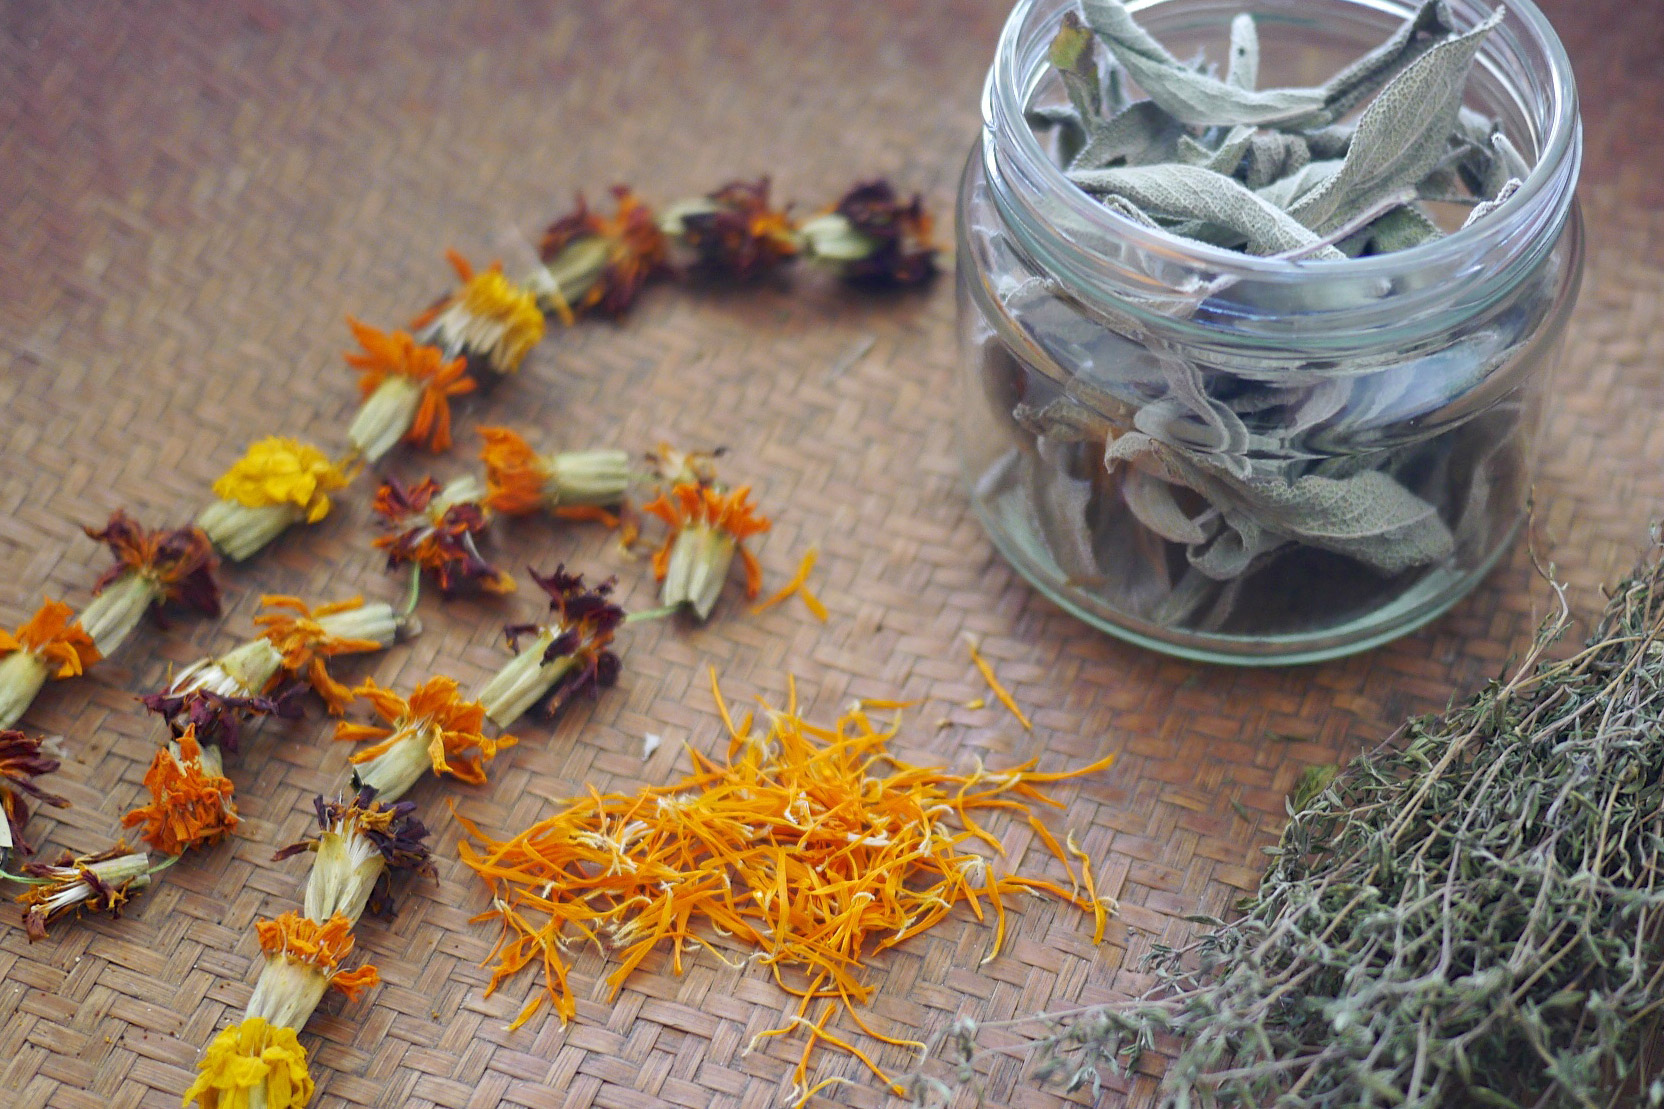 Tips for Air Drying and Storing Culinary and Medicinal Herbs - The